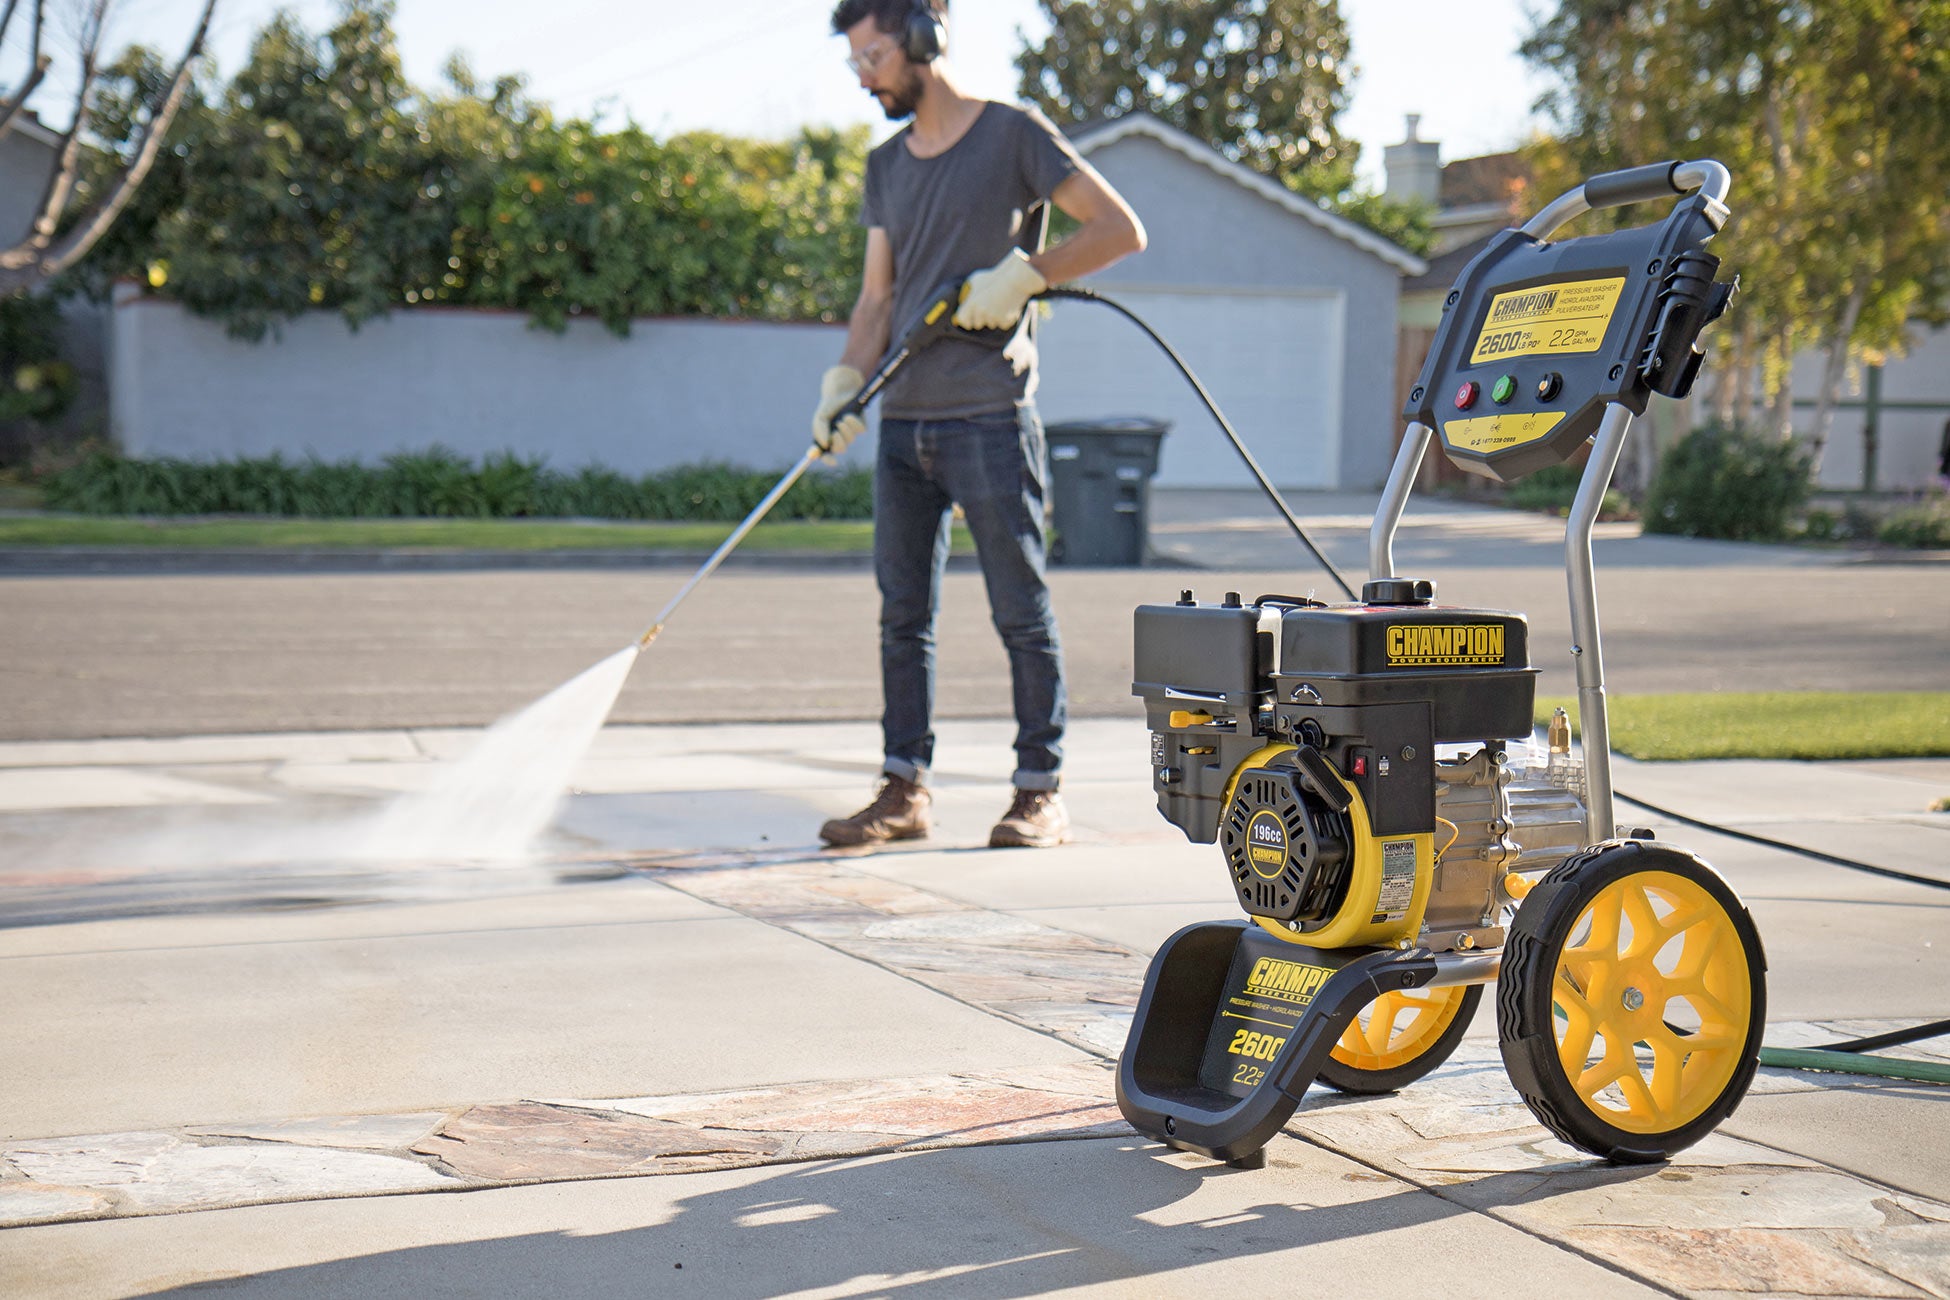 Champion 179 Bar (2600 PSI) 8.3 LPM Pressure Washer for high pressure pavement cleaning